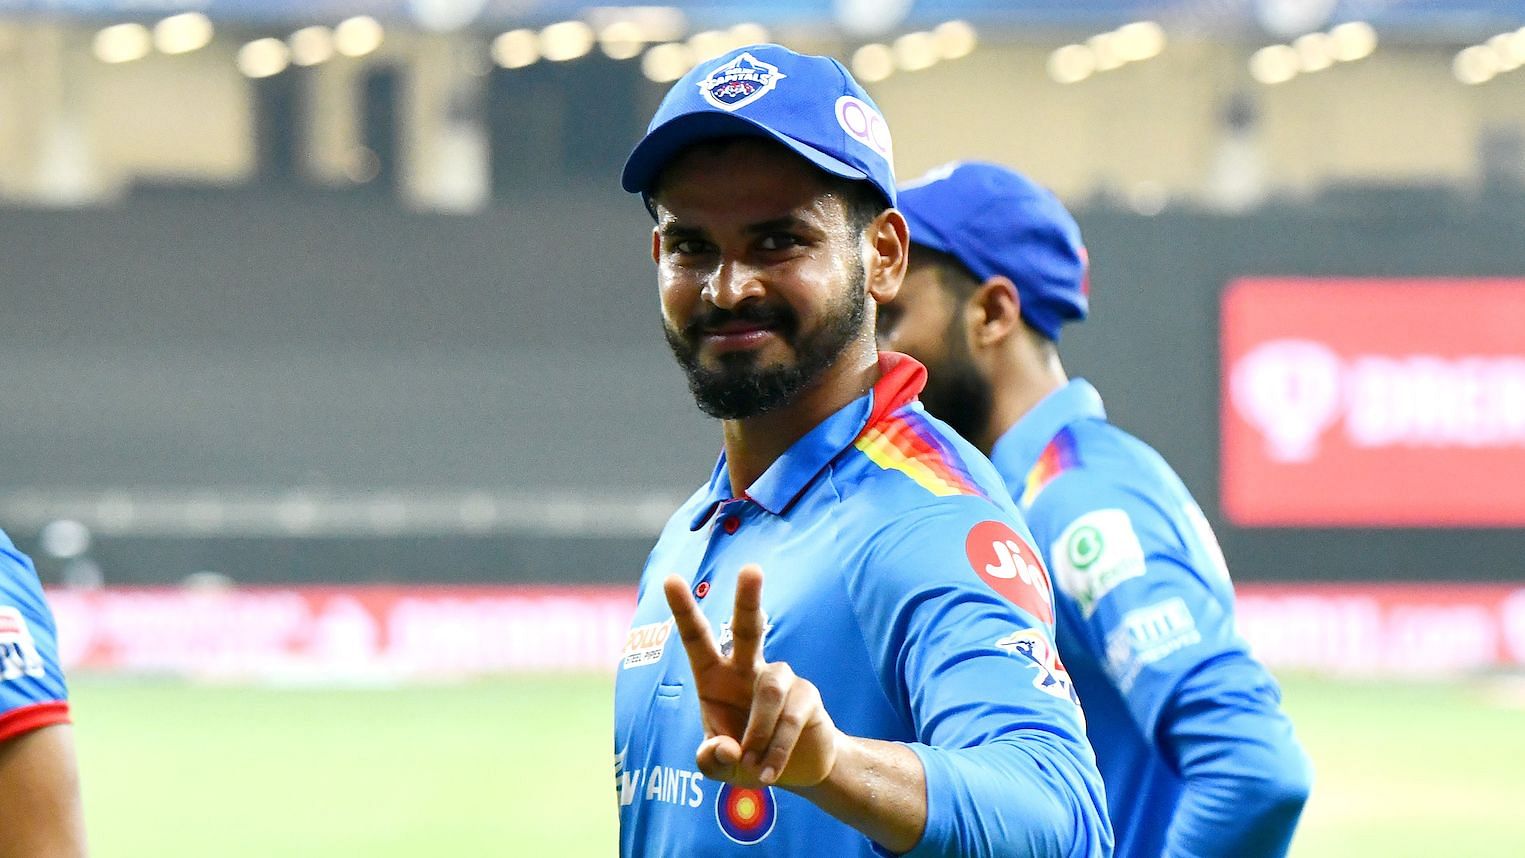 Delhi Capitals (DC) captain Shreyas Iyer hailed his team mates for their performance after they recorded a 46-run win over Rajasthan Royals (RR) on Friday.